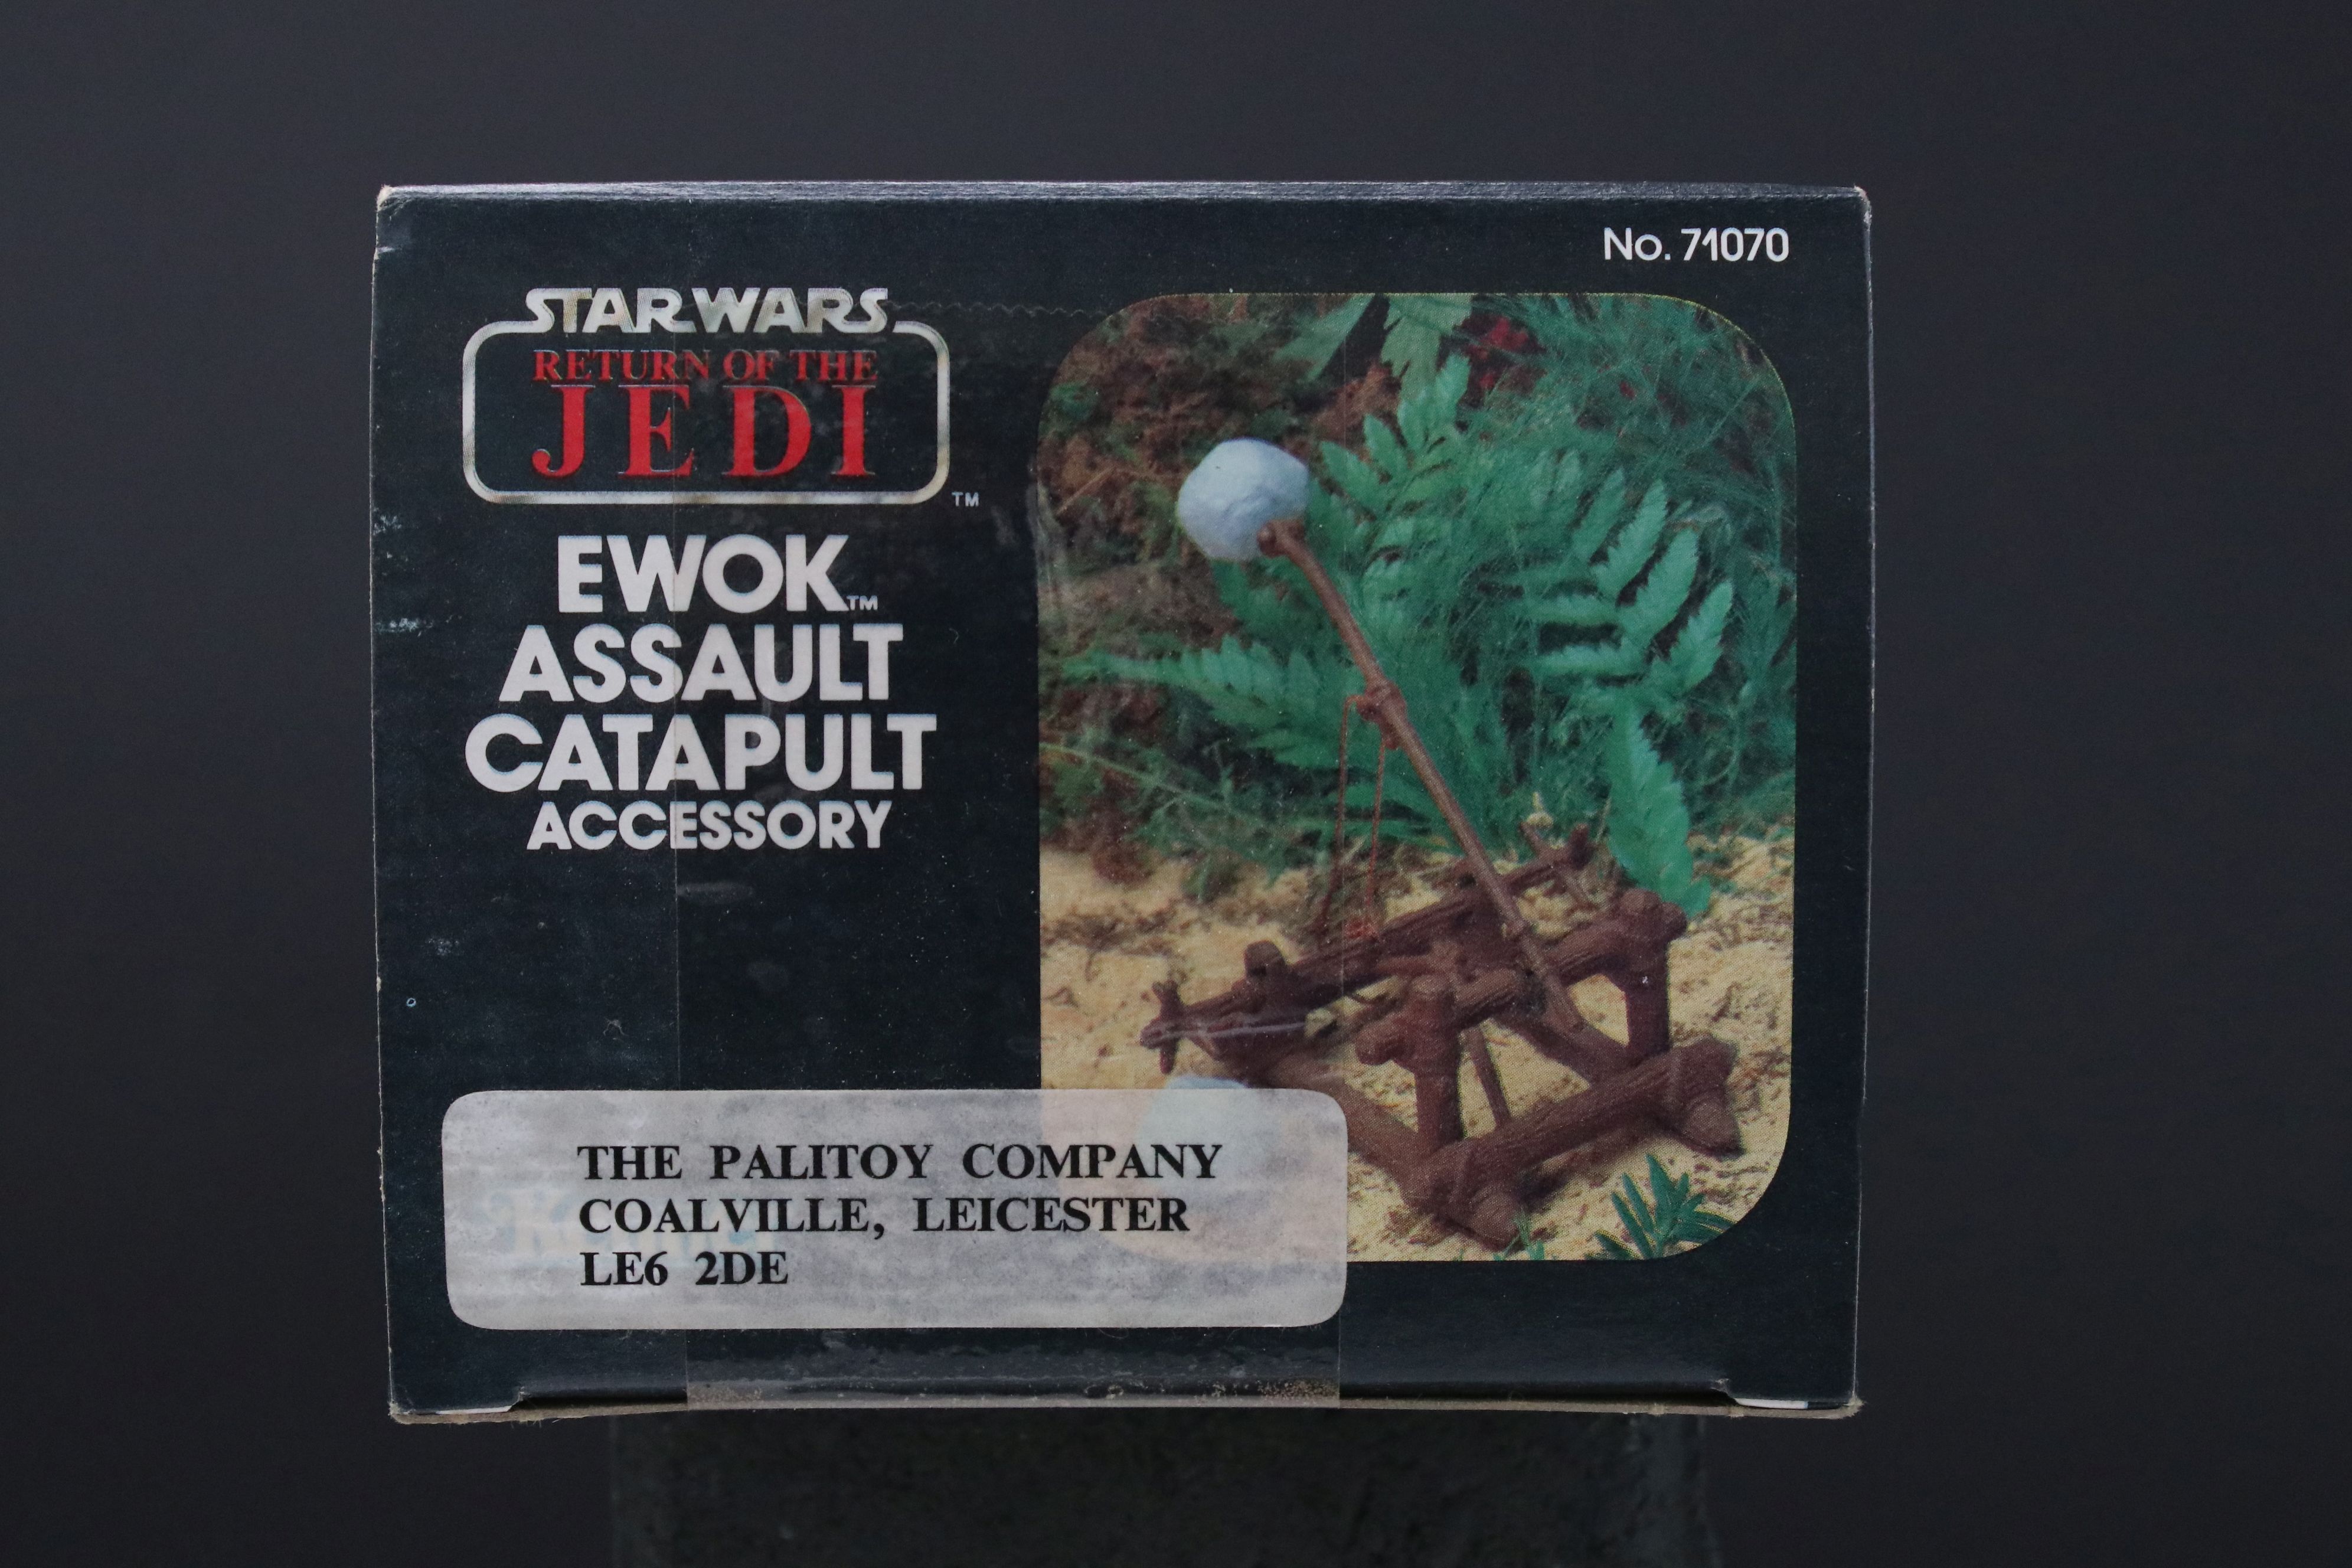 Star Wars - Boxed original Kenner Star Wars Return of the Jedi Ewok Assault Catapult accessory, - Image 6 of 7